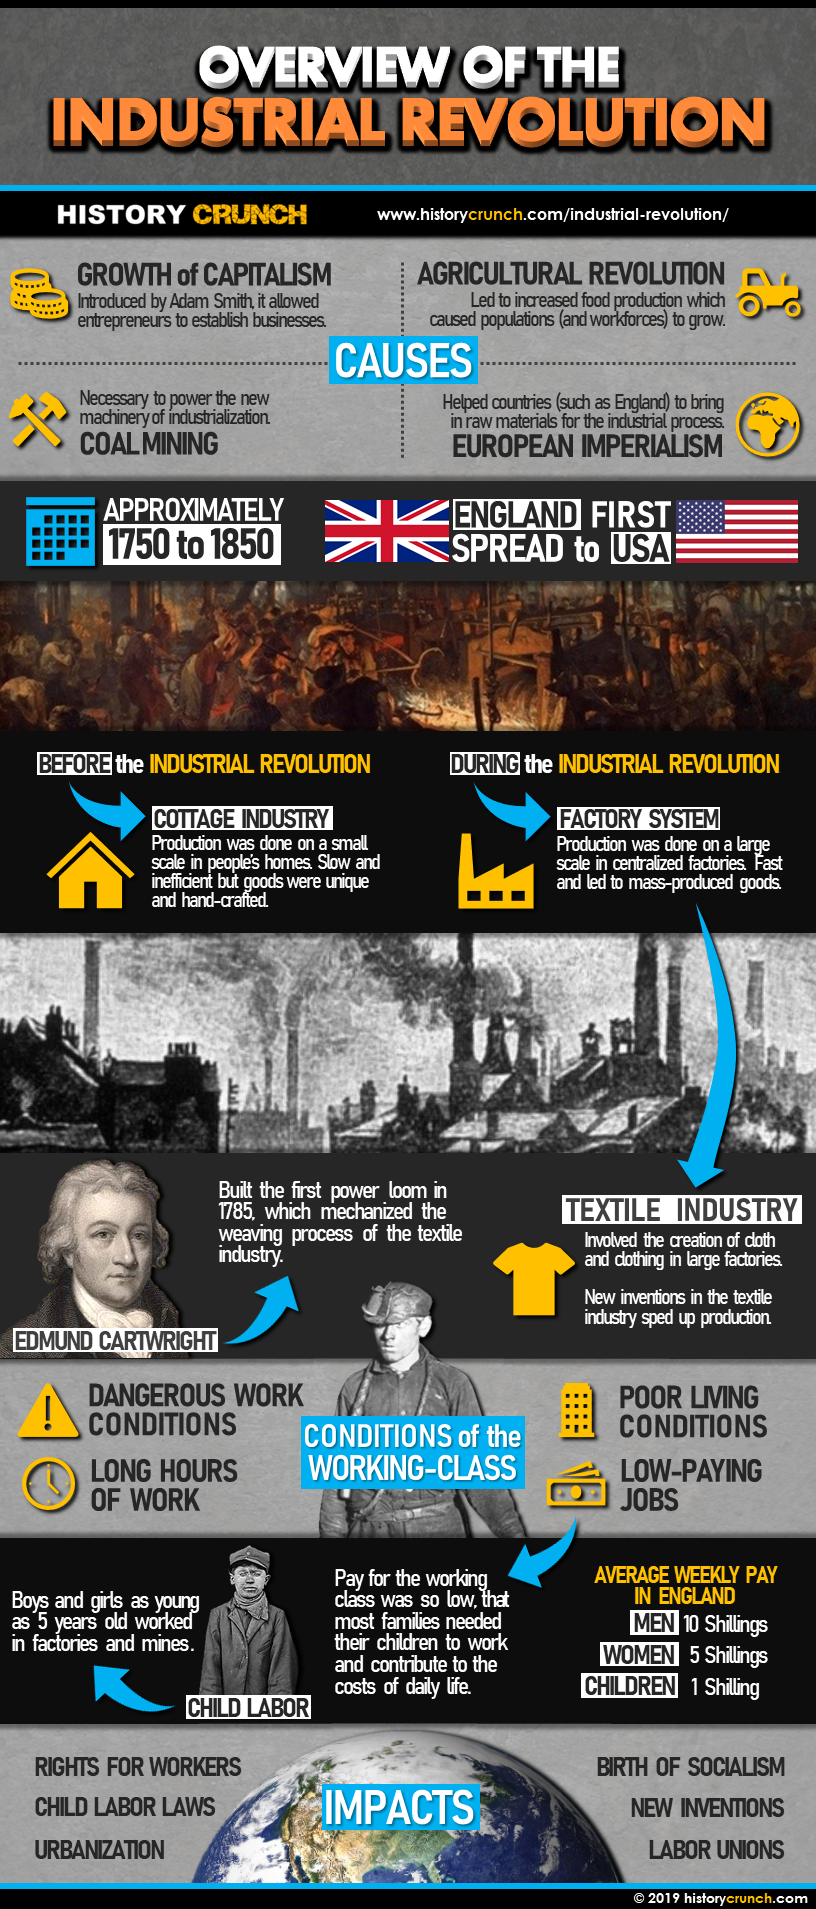 Industrial Revolution Overview Infographic